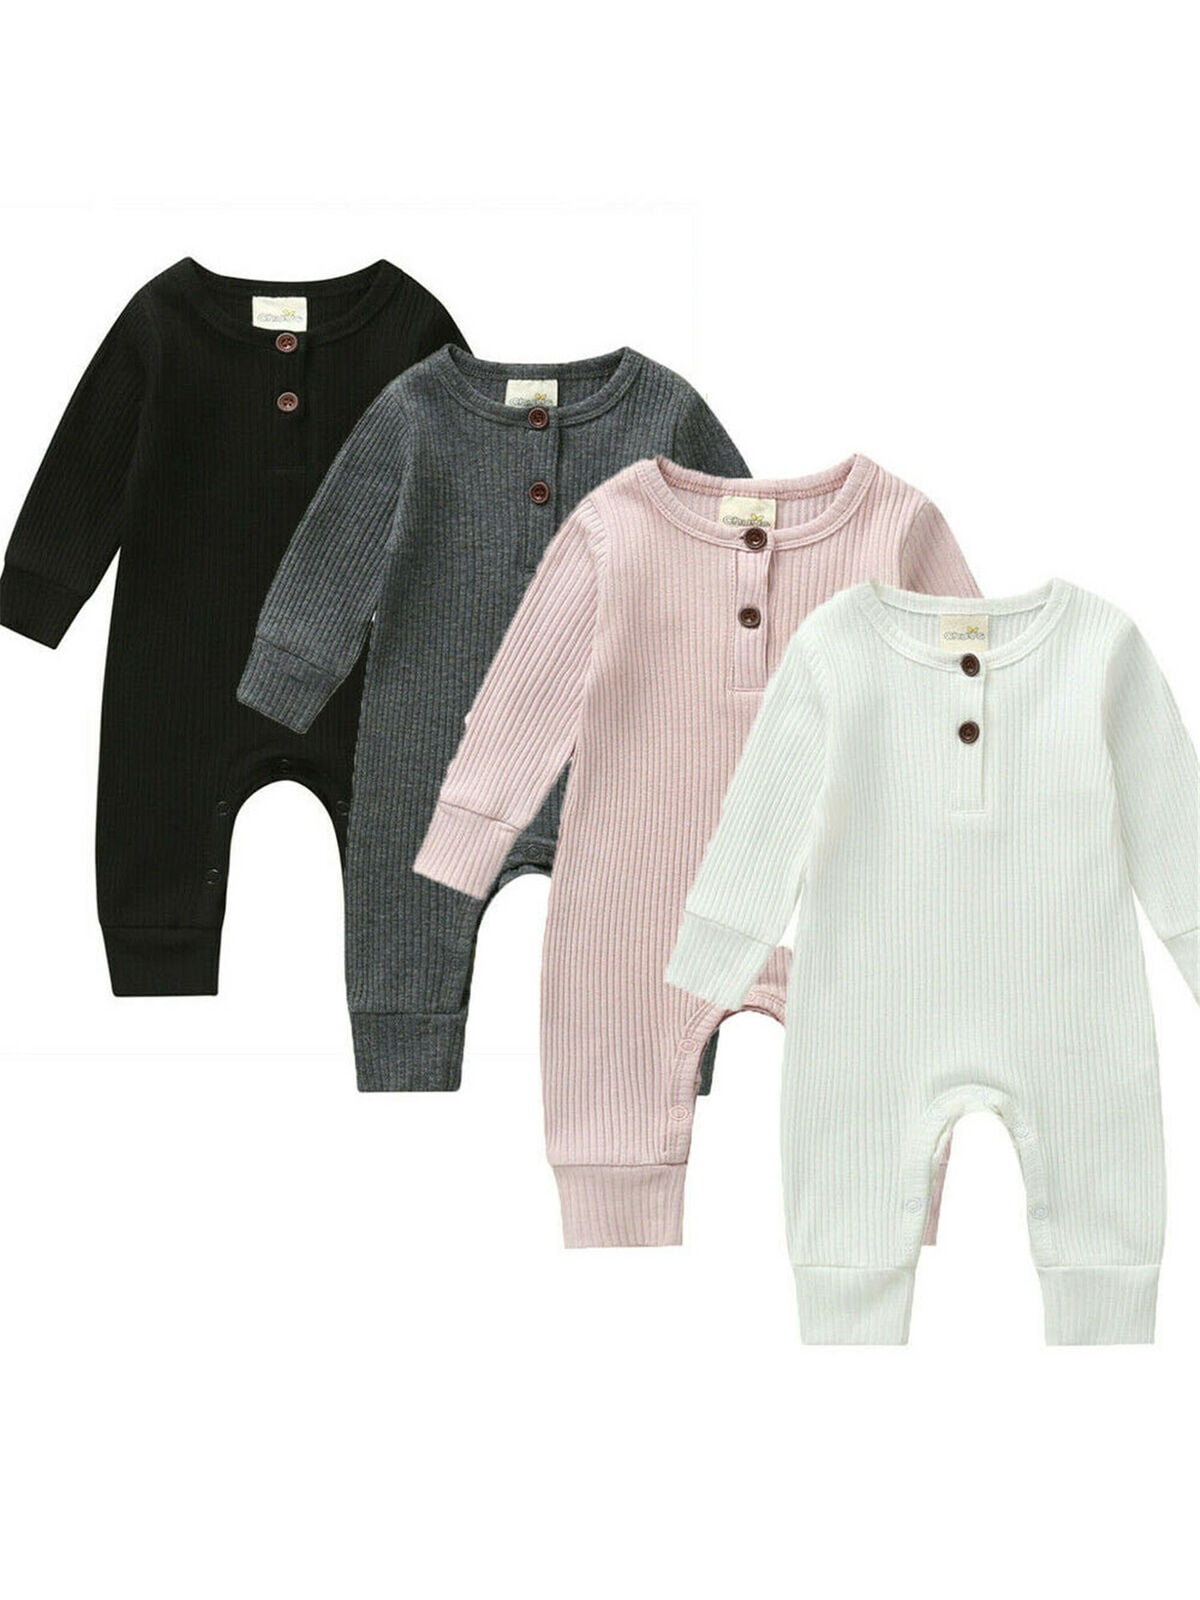 Newborn Baby Girl Boy Plain Long Sleeve Ribbed Romper Jumpsuit Pajamas with Pants Warm Fall Winter Clothes Outfits 